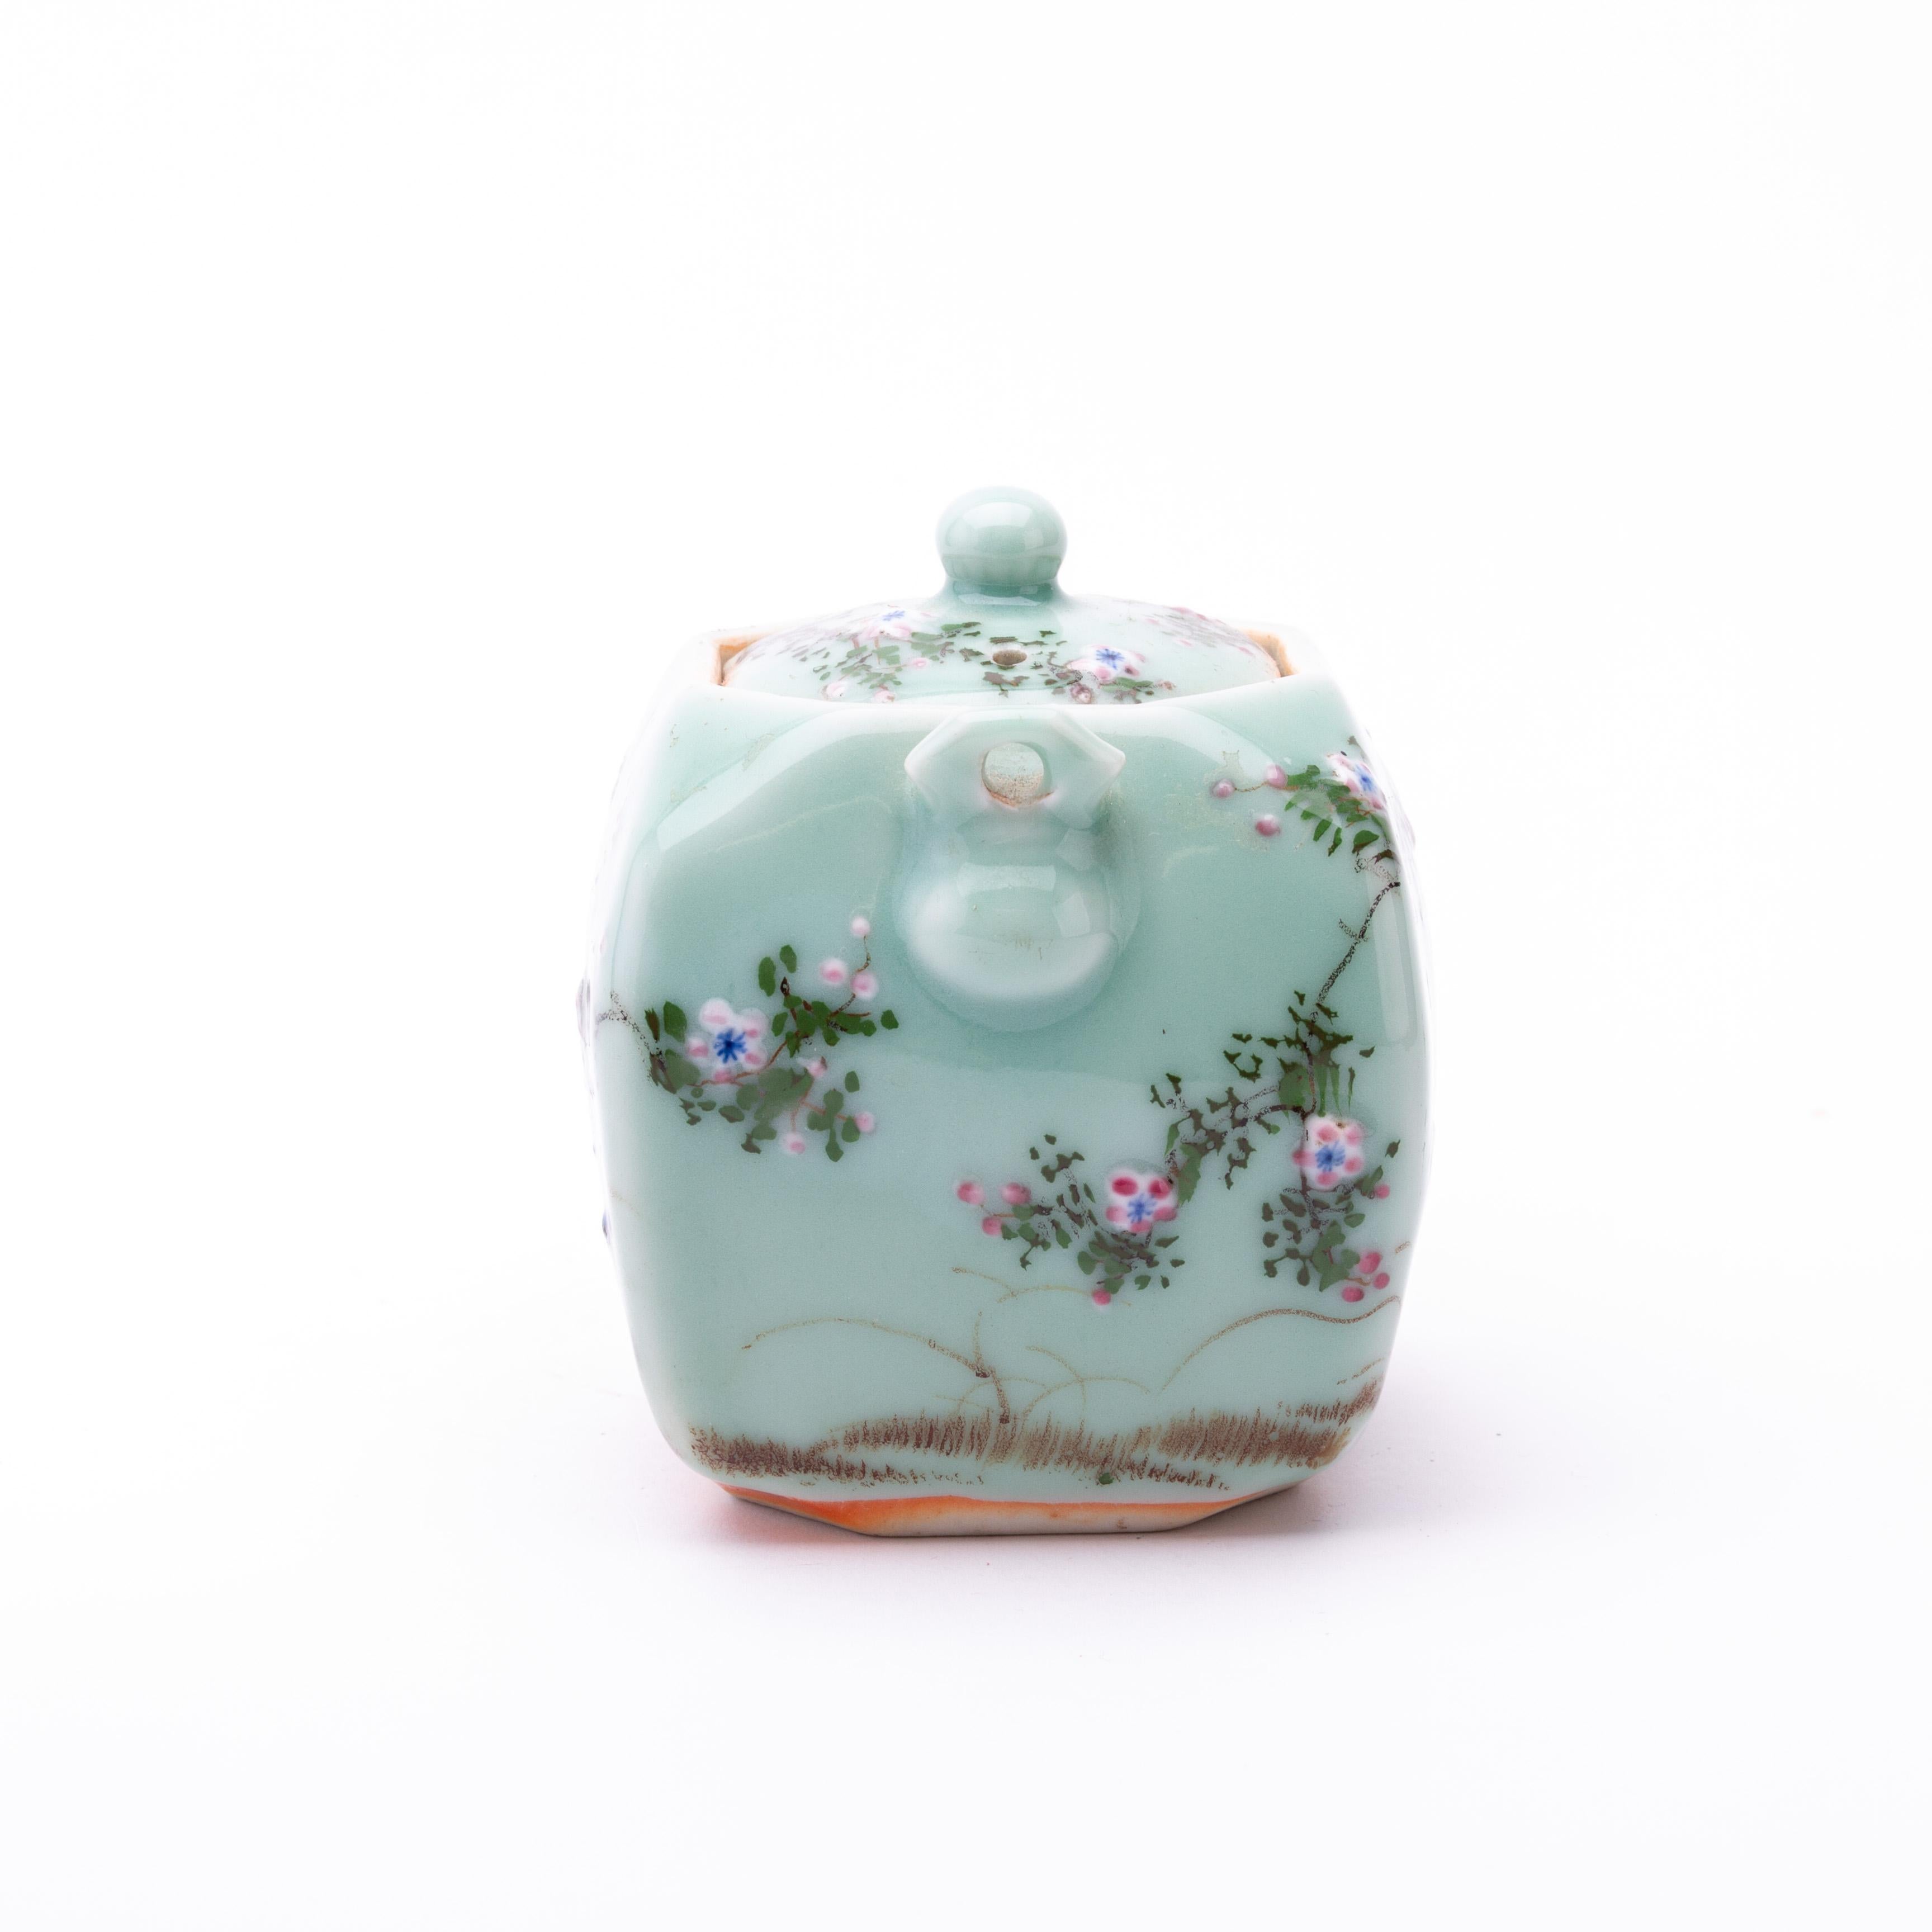 Chinese Hand Painted Celadon Glazed Blossoms Teapot
Good condition
Free international shipping.